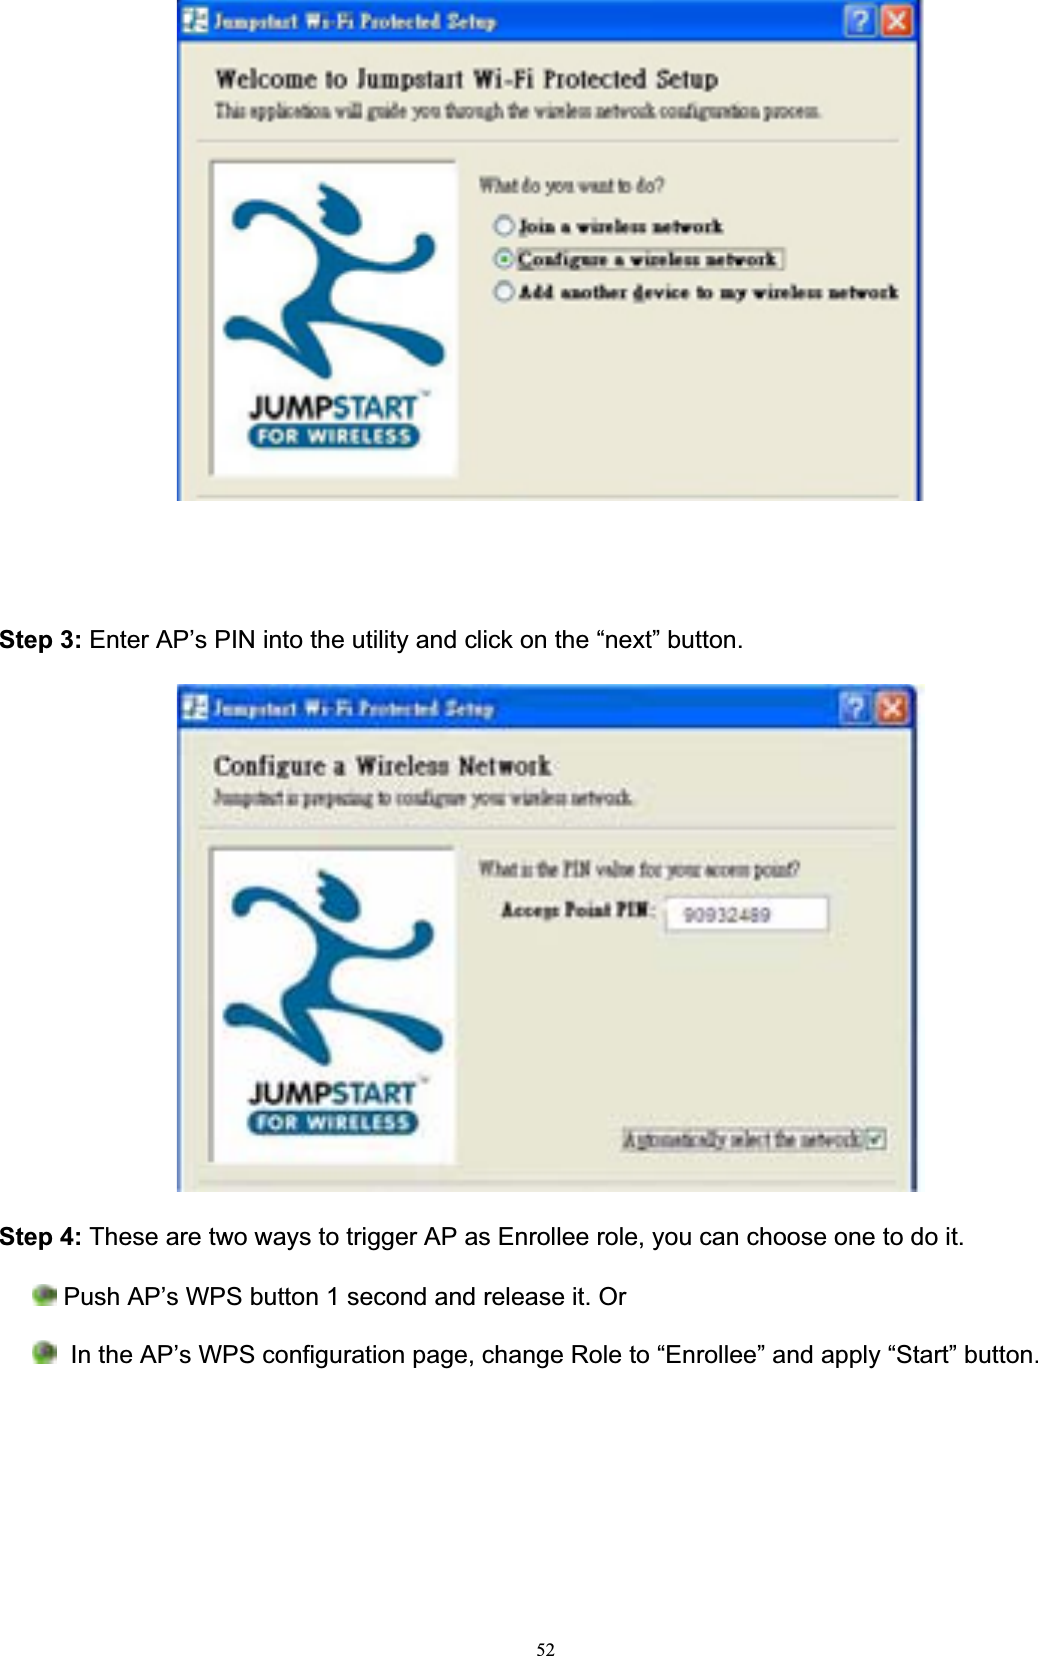 52Step 3: Enter AP’s PIN into the utility and click on the “next” button.Step 4: These are two ways to trigger AP as Enrollee role, you can choose one to do it.  Push AP’s WPS button 1 second and release it. Or  In the AP’s WPS configuration page, change Role to “Enrollee” and apply “Start” button.